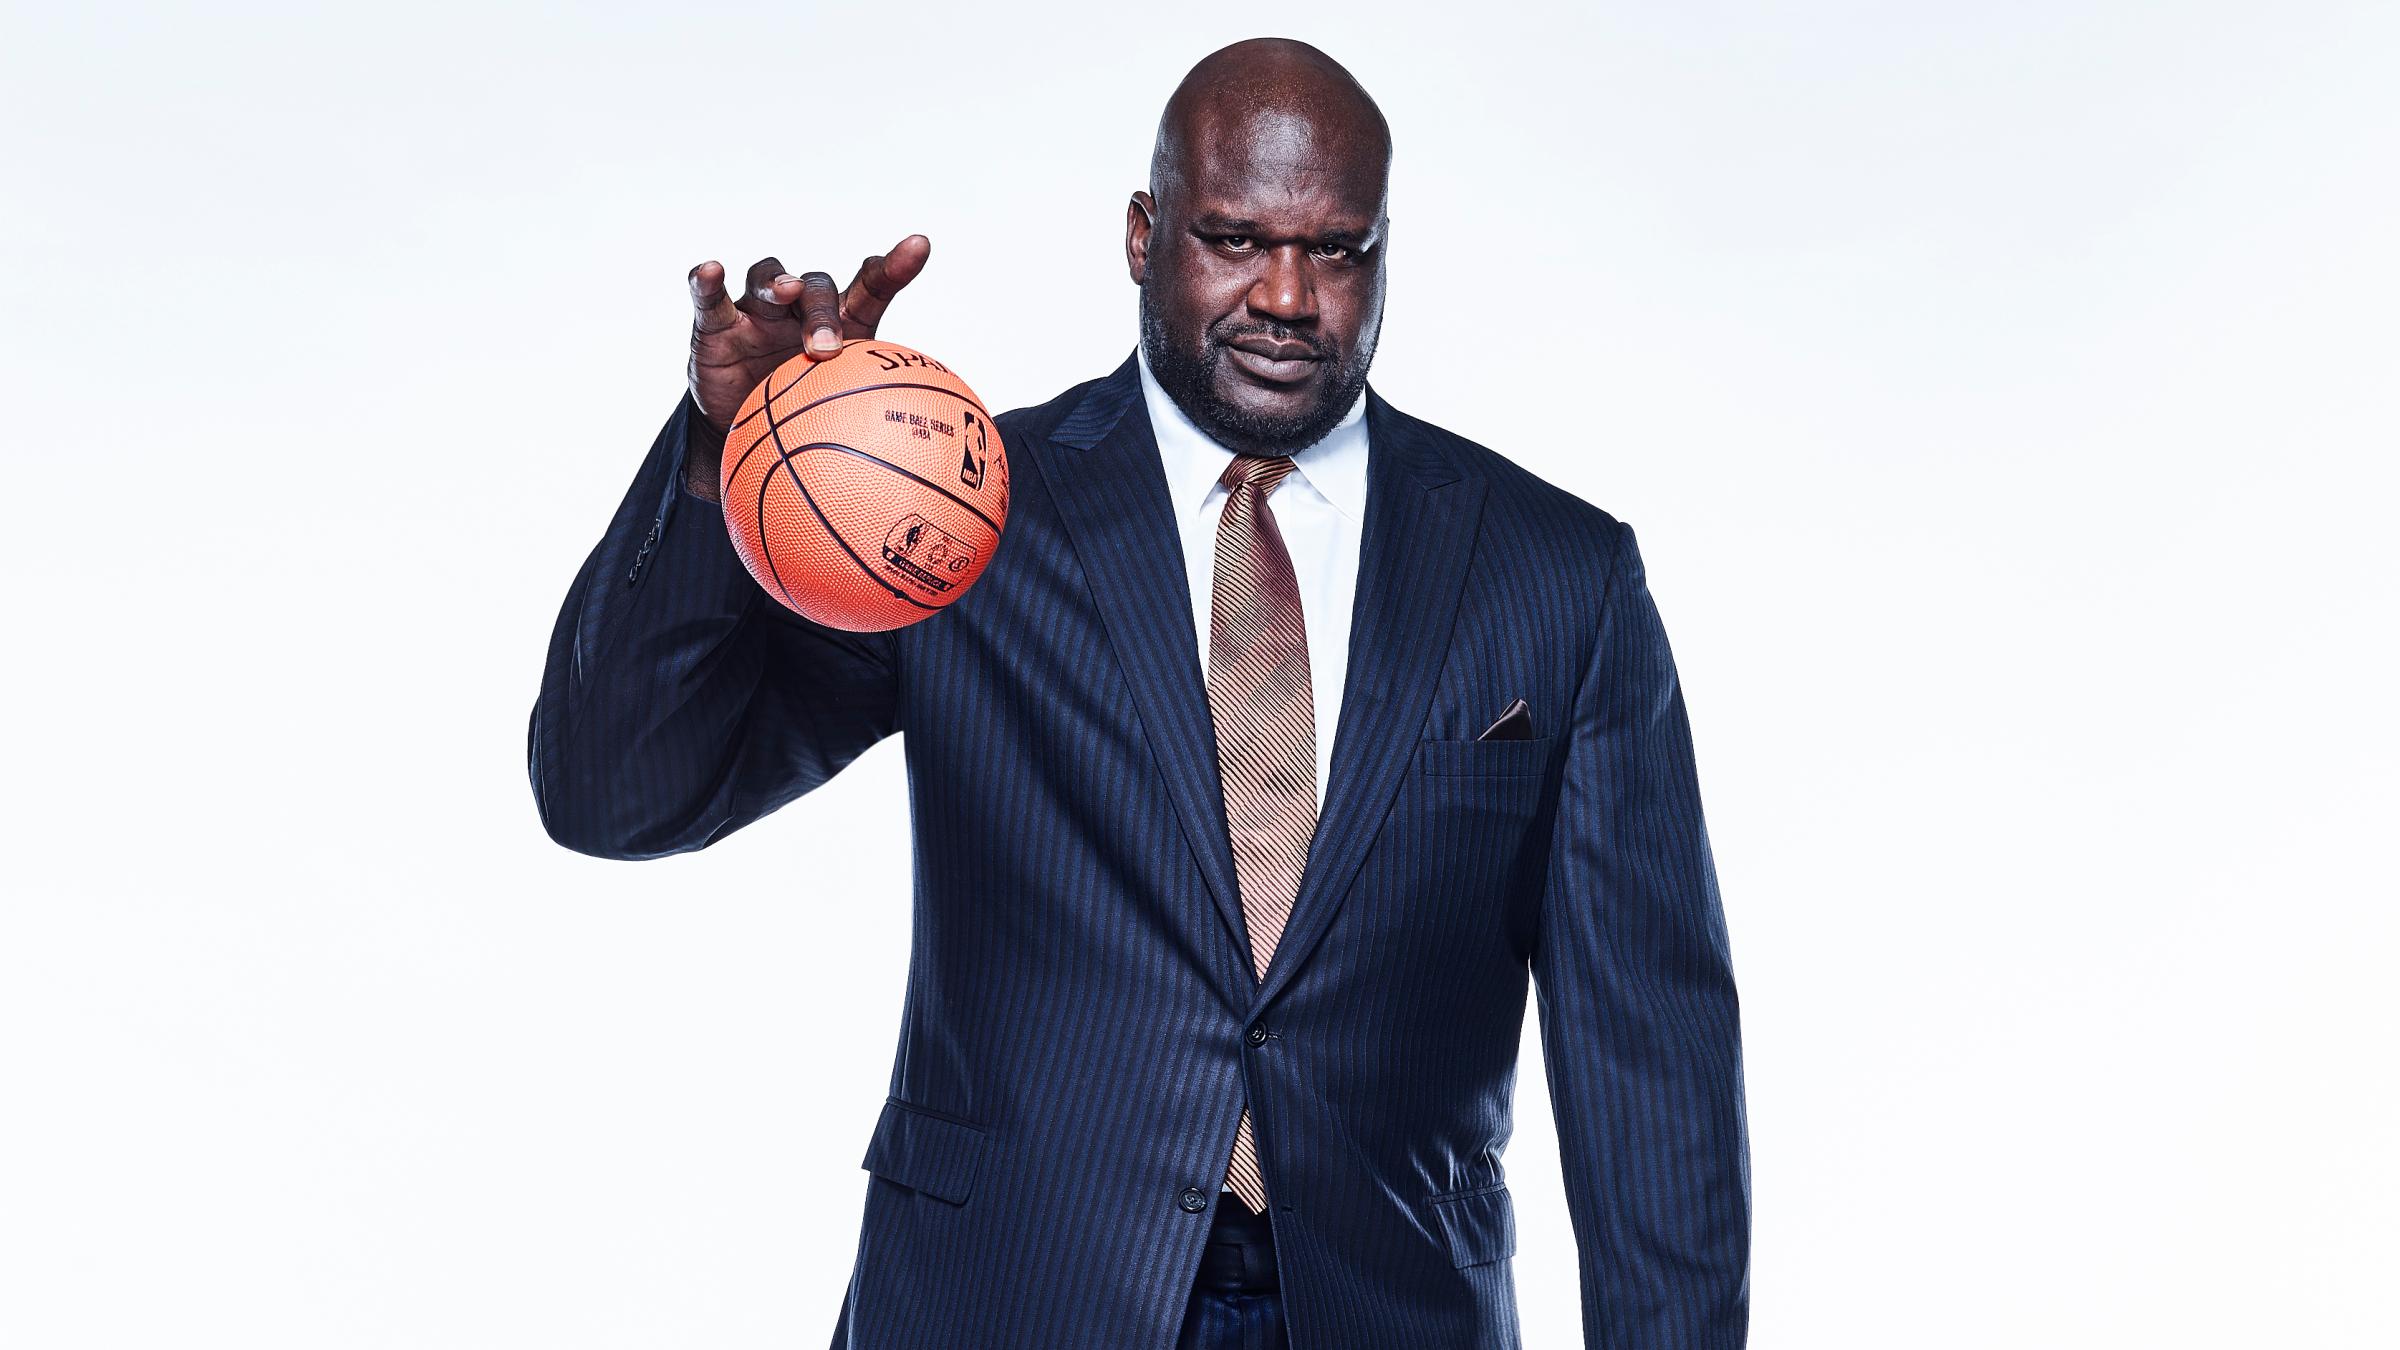 Shoot Some Hoops with Shaq At The Star!